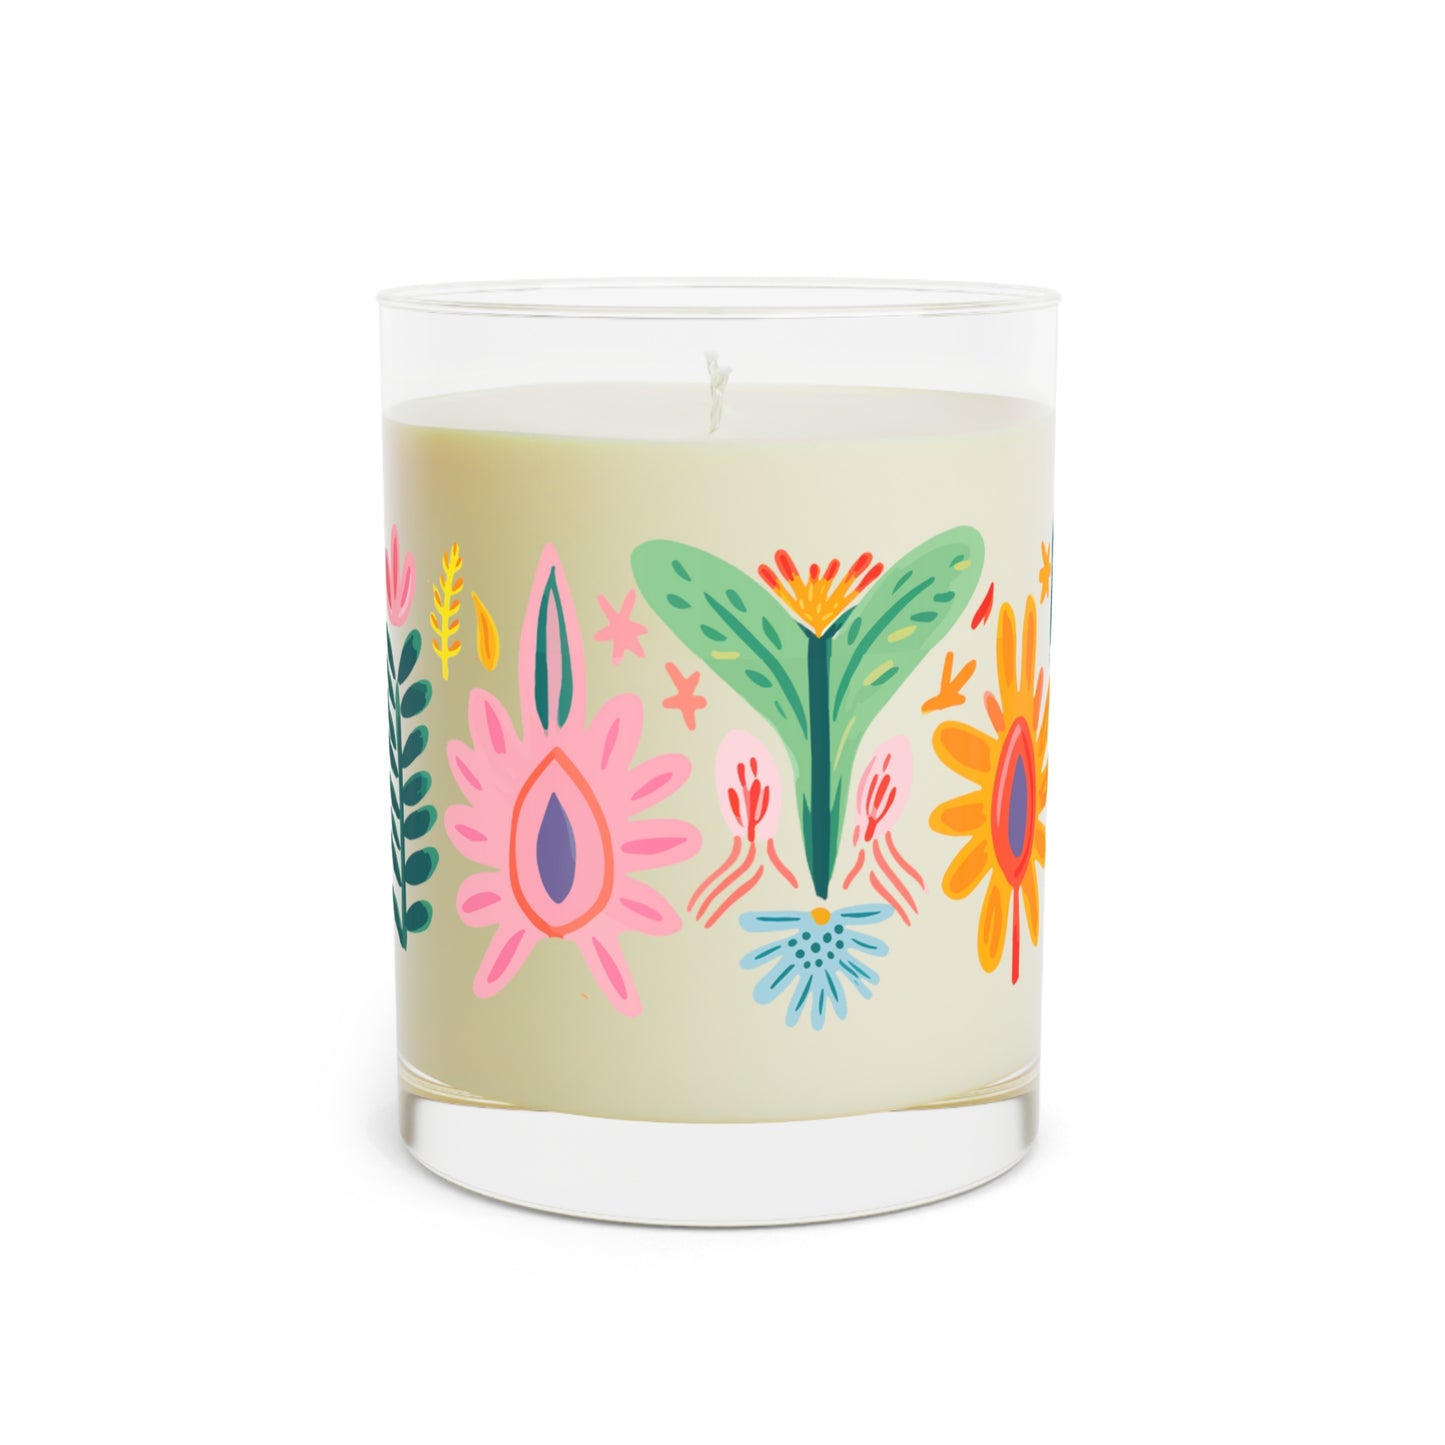 Regenbogen x Seventh Avenue Apothecary Collab // Marbella Scented Candle (3 scents)